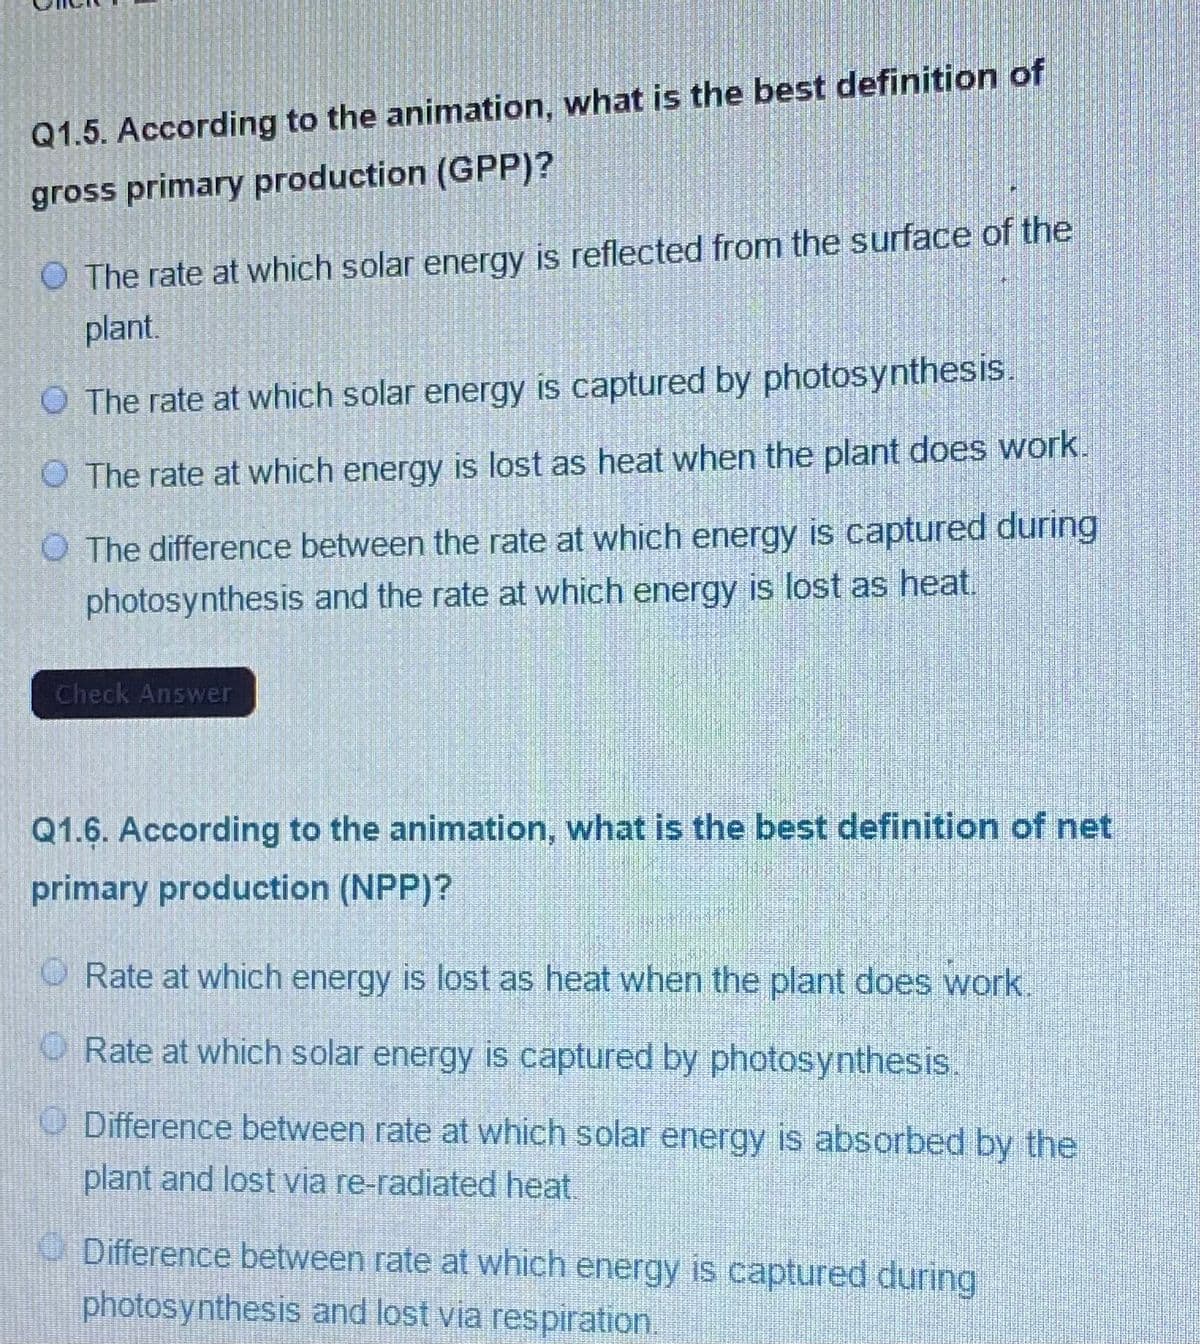 Q1.5. According to the animation, what is the best definition of
gross primary production (GPP)?
O The rate at which solar energy is reflected from the surface of the
plant.
O The rate at which solar energy is captured by photosynthesis.
O The rate at which energy is lost as heat when the plant does work.
O The difference between the rate at which energy is captured during
photosynthesis and the rate at which energy is lost as heat.
Check Answer
Q1.6. According to the animation, what is the best definition of net
primary production (NPP)?
O Rate at which energy is lost as heat when the plant does work.
O Rate at which solar energy is captured by photosynthesis.
O Difference between rate at which solar energy is absorbed by the
plant and lost via re-radiated heat.
O Difference between rate at which energy is captured during
photosynthesis and lost via respiration.
